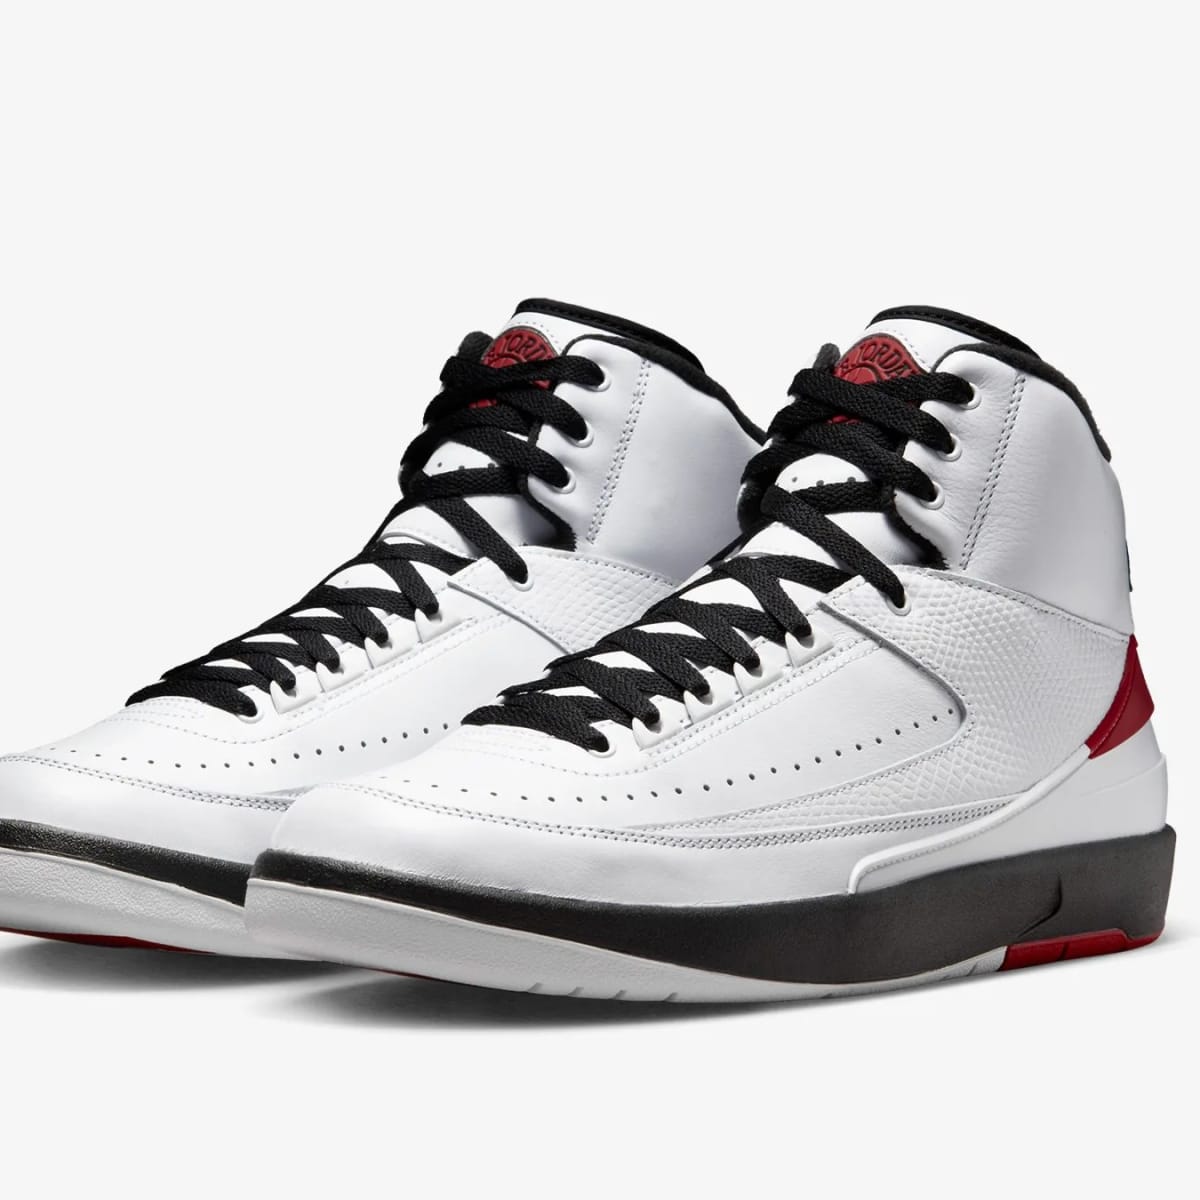 Lichaam Vooruitzien vergeven How to Buy the Air Jordan 2 'Chicago' - Sports Illustrated FanNation Kicks  News, Analysis and More